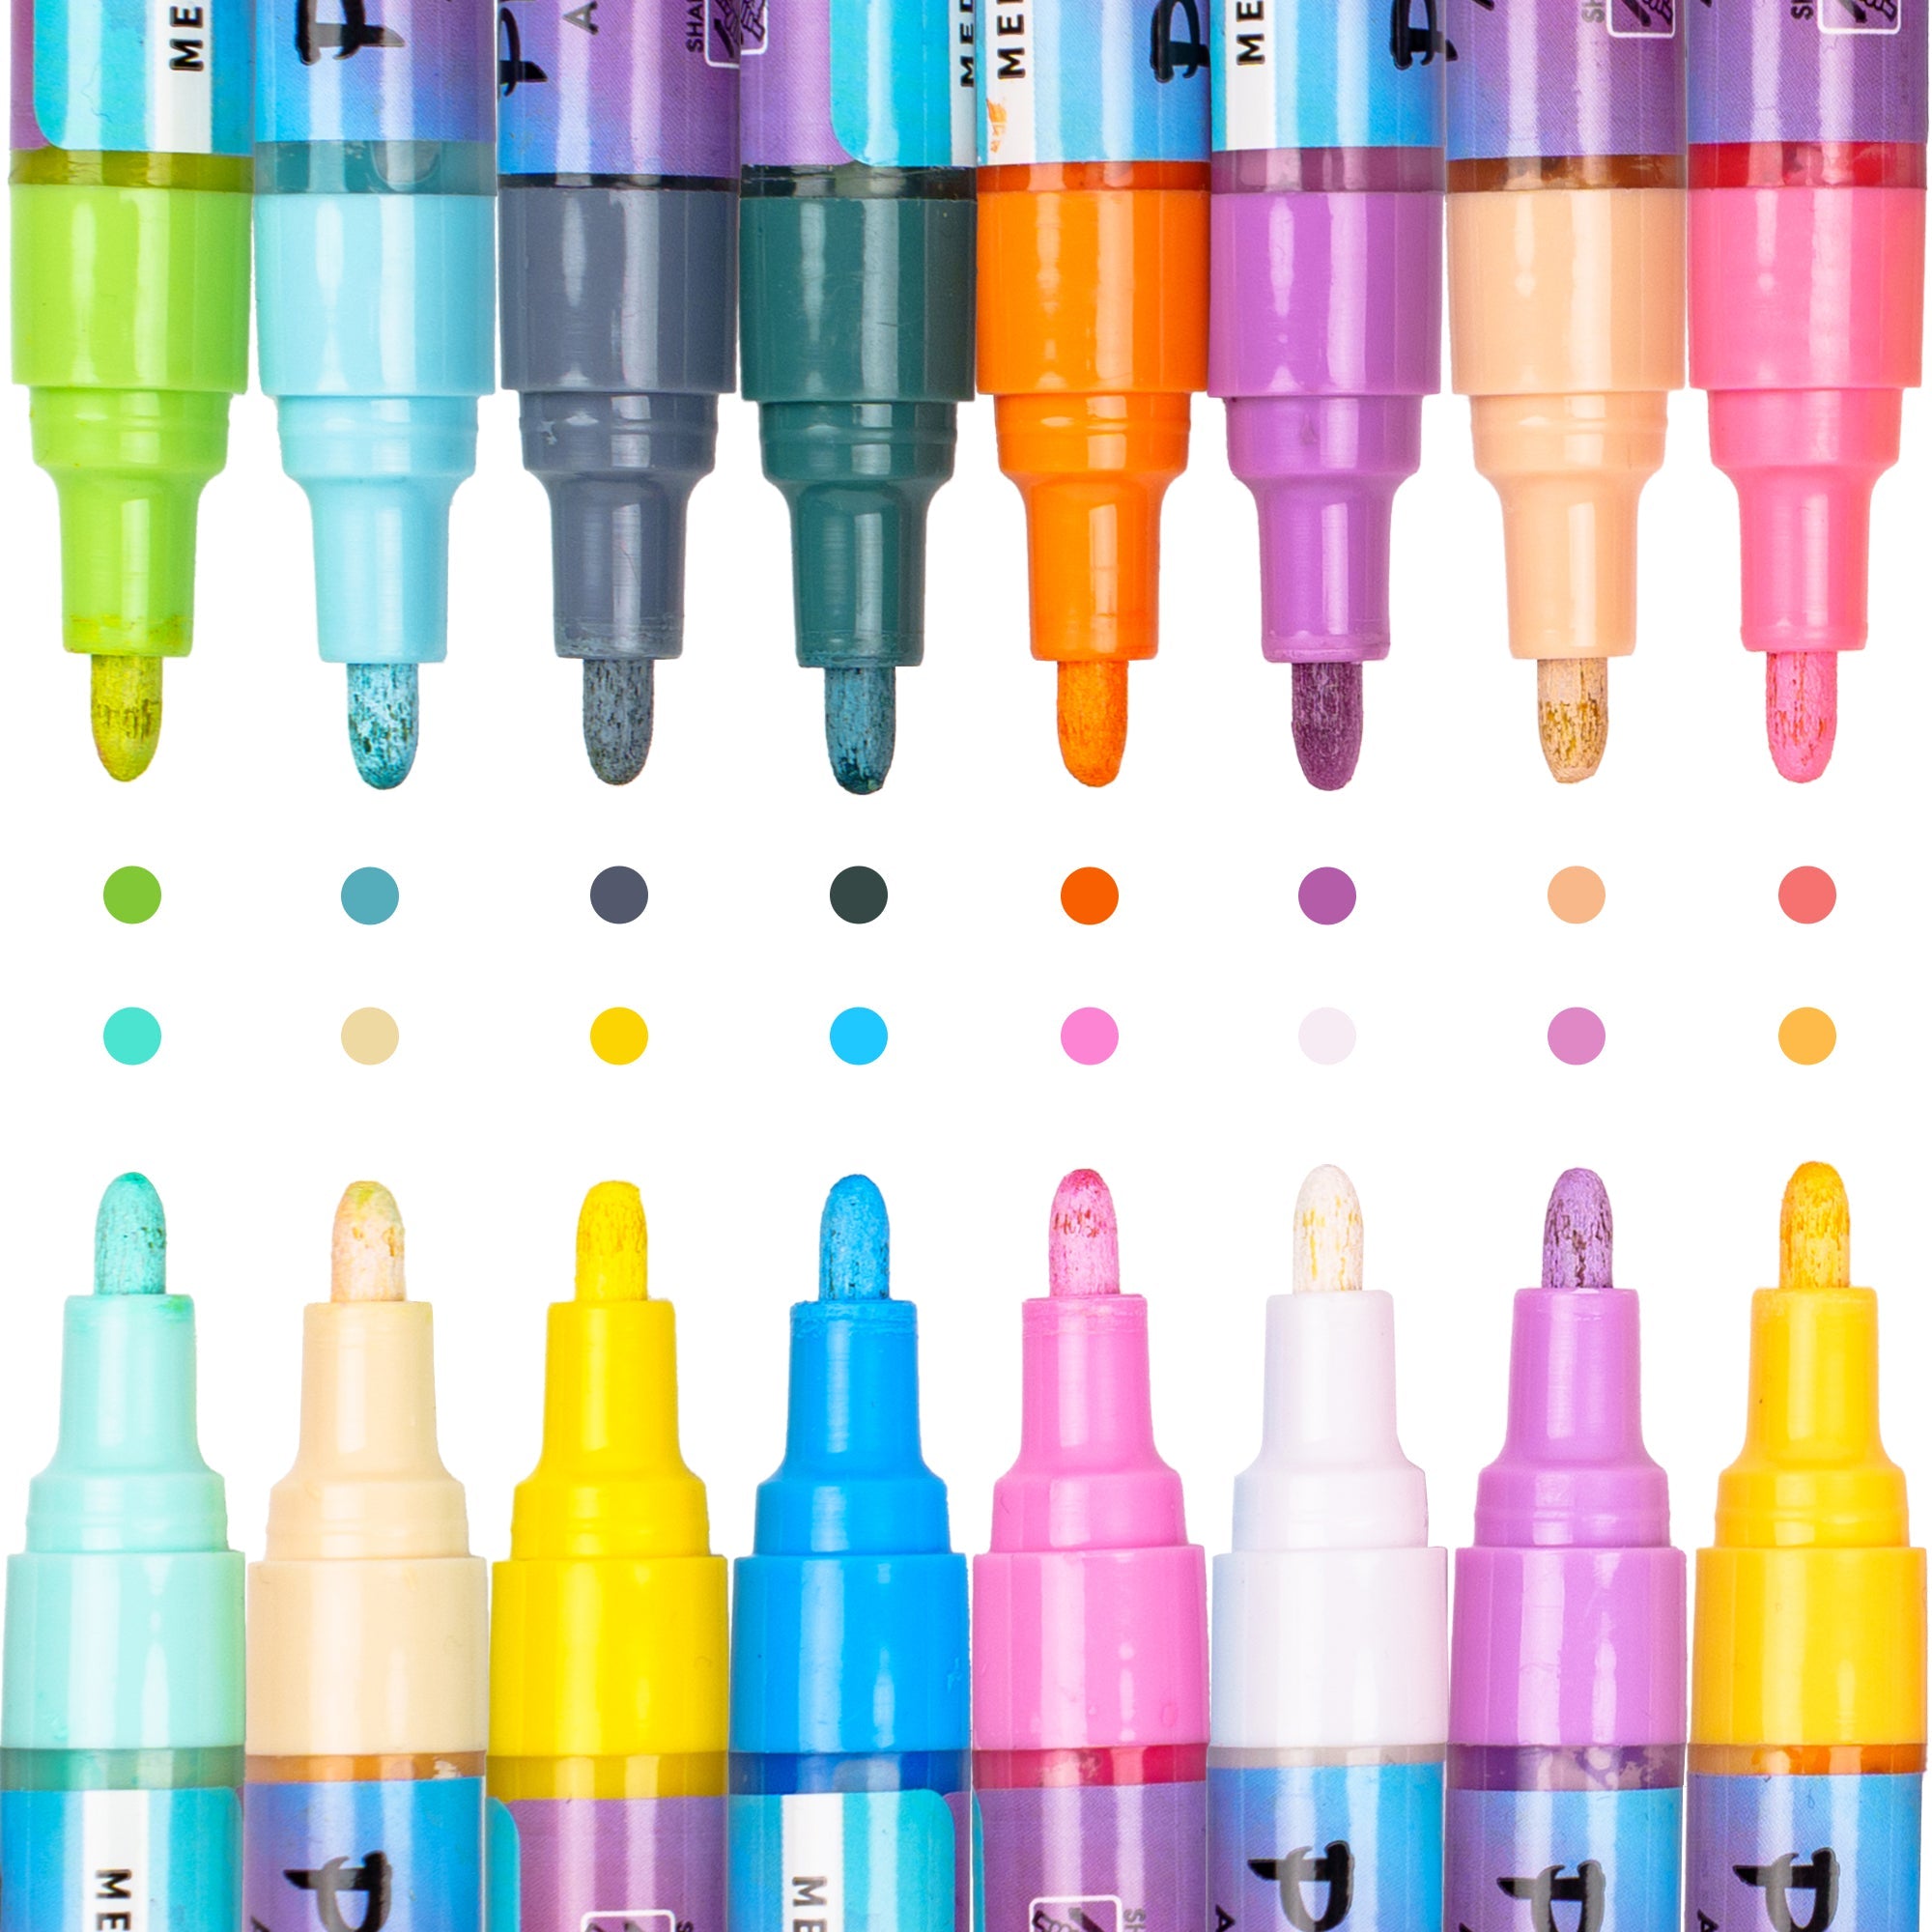 Emooqi Paint Pens, Paint Markers 20 Pack Oil-Based Painting Pen